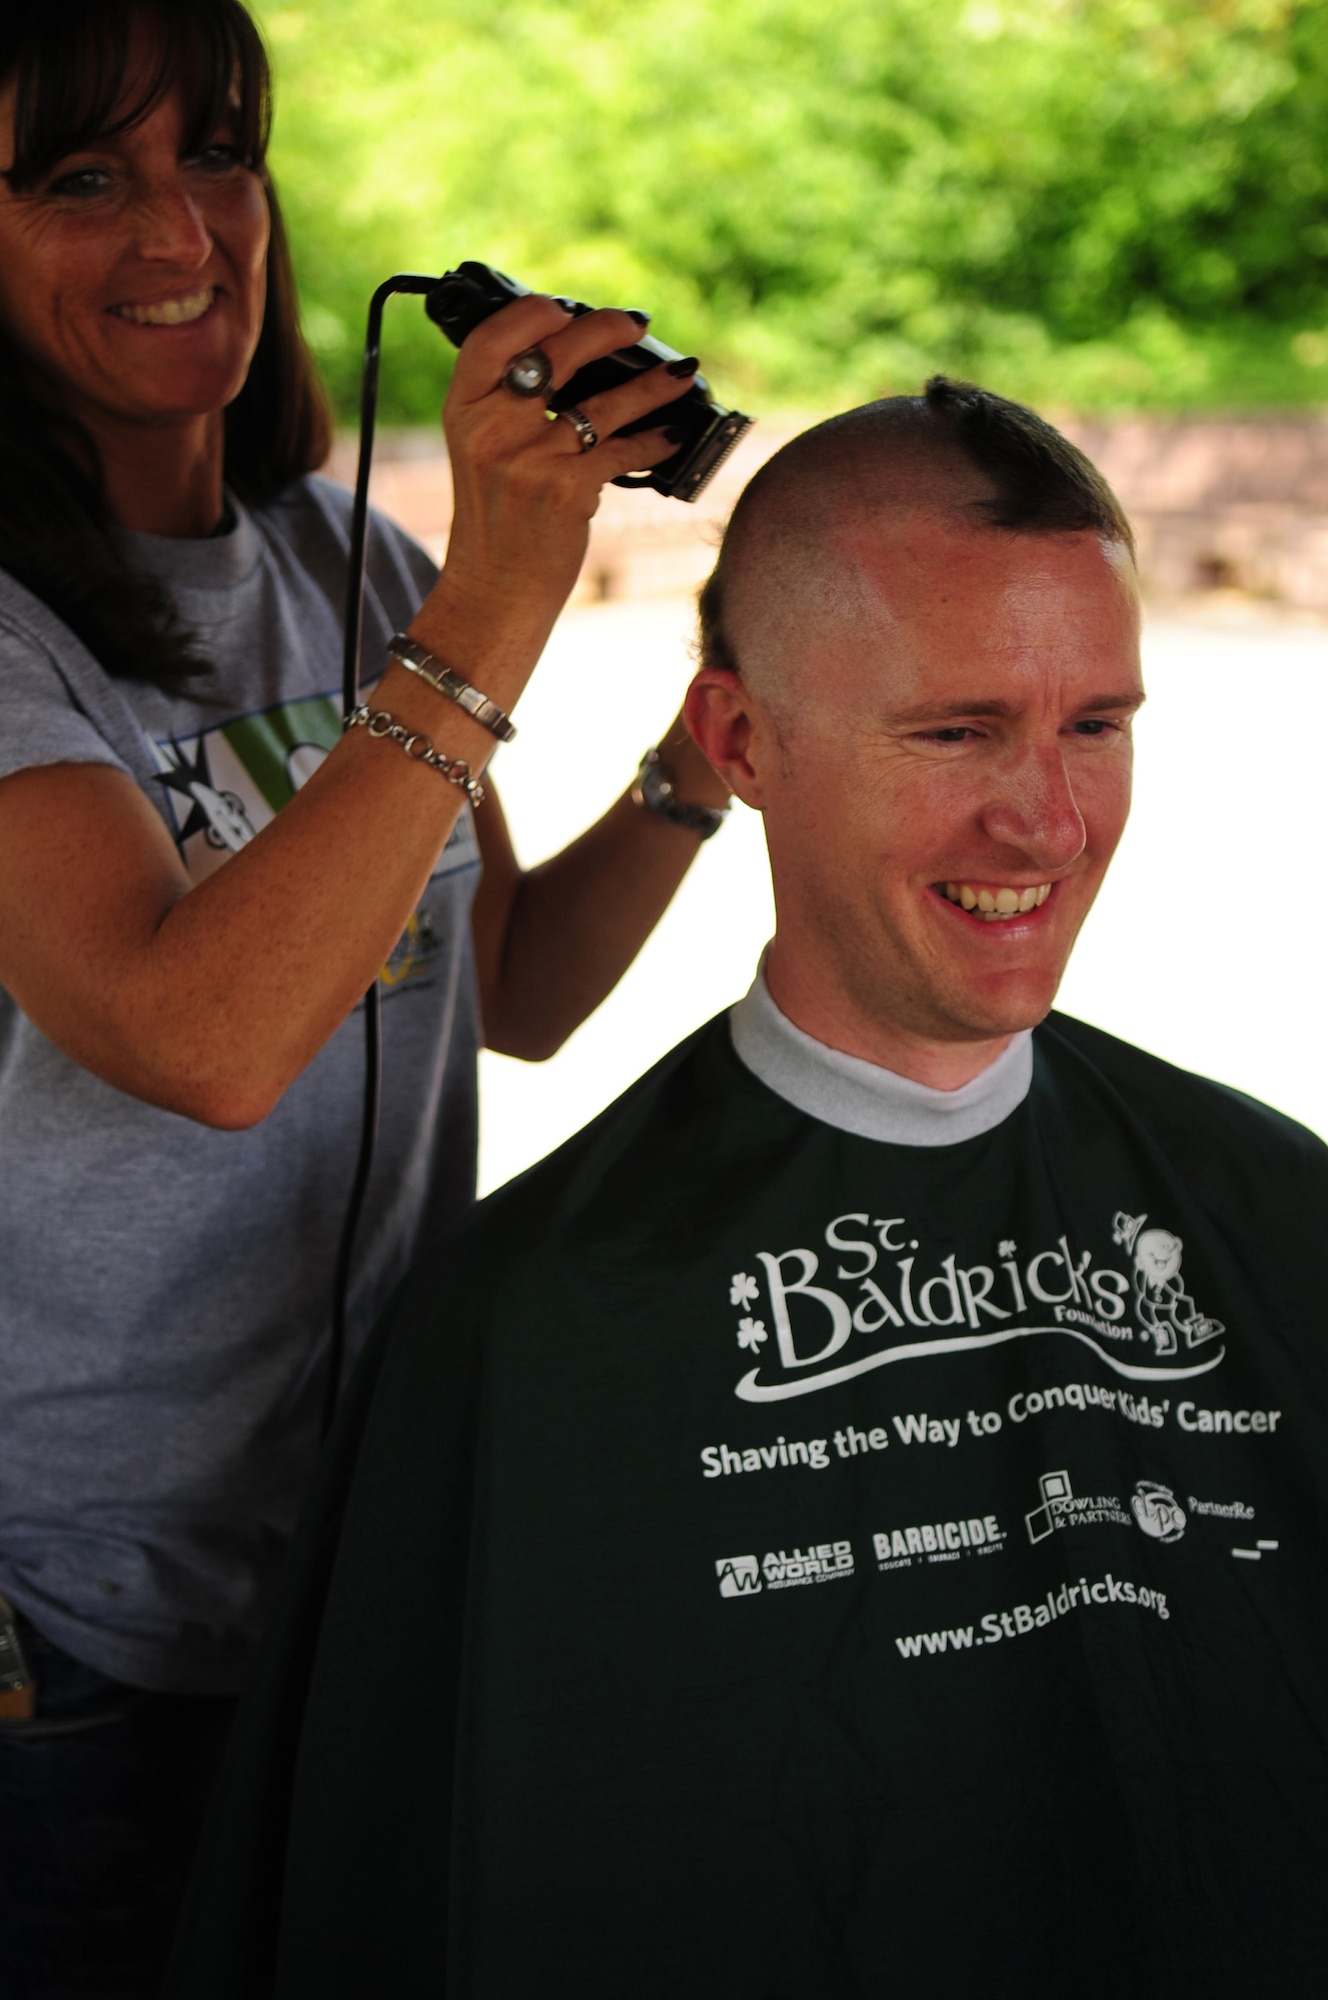 U.S. Air Force Tech. Sgt. Timothy Beardsley 86th Maintenance Squadron has his head shaved by volunteer Heike Lauer, in participation of the St. Baldrick's event that he and his wife Heike organized in their 3-year-old daughter, Josie's honor. Josie was diagnosed with Leukemia two years ago today, Ramstein Air Base Germany, June 26, 2010. The St. Baldrick's Foundation is an organization that tasks volunteers with getting sponsored to have their heads shaved as a demonstration of their camaraderie to children that have been diagnosed with cancer. (U.S. Air Force Photo by Staff Sgt. Jocelyn Rich)